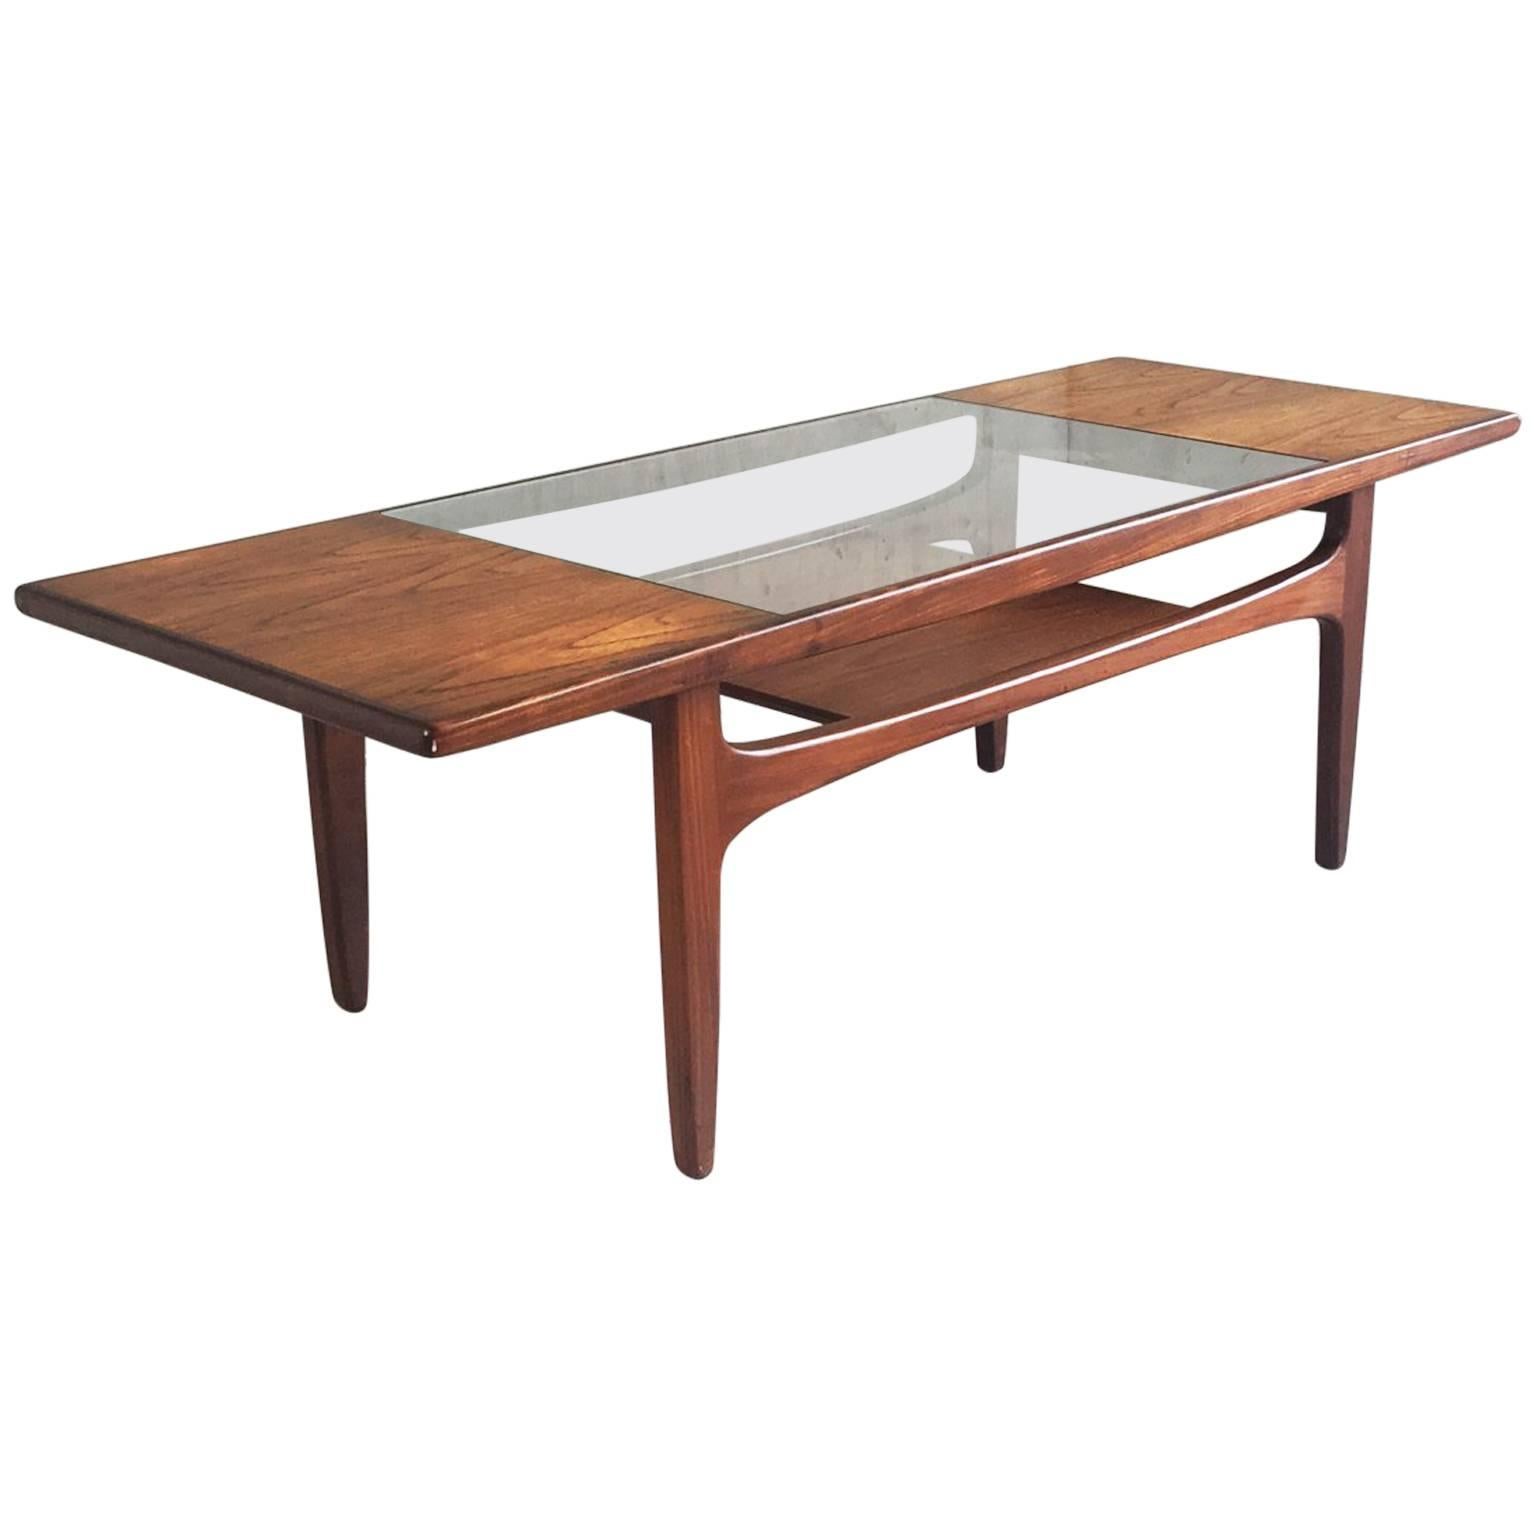 1970s G Plan Mid-Century Modern Teak Coffee Table with Glass Inset For Sale